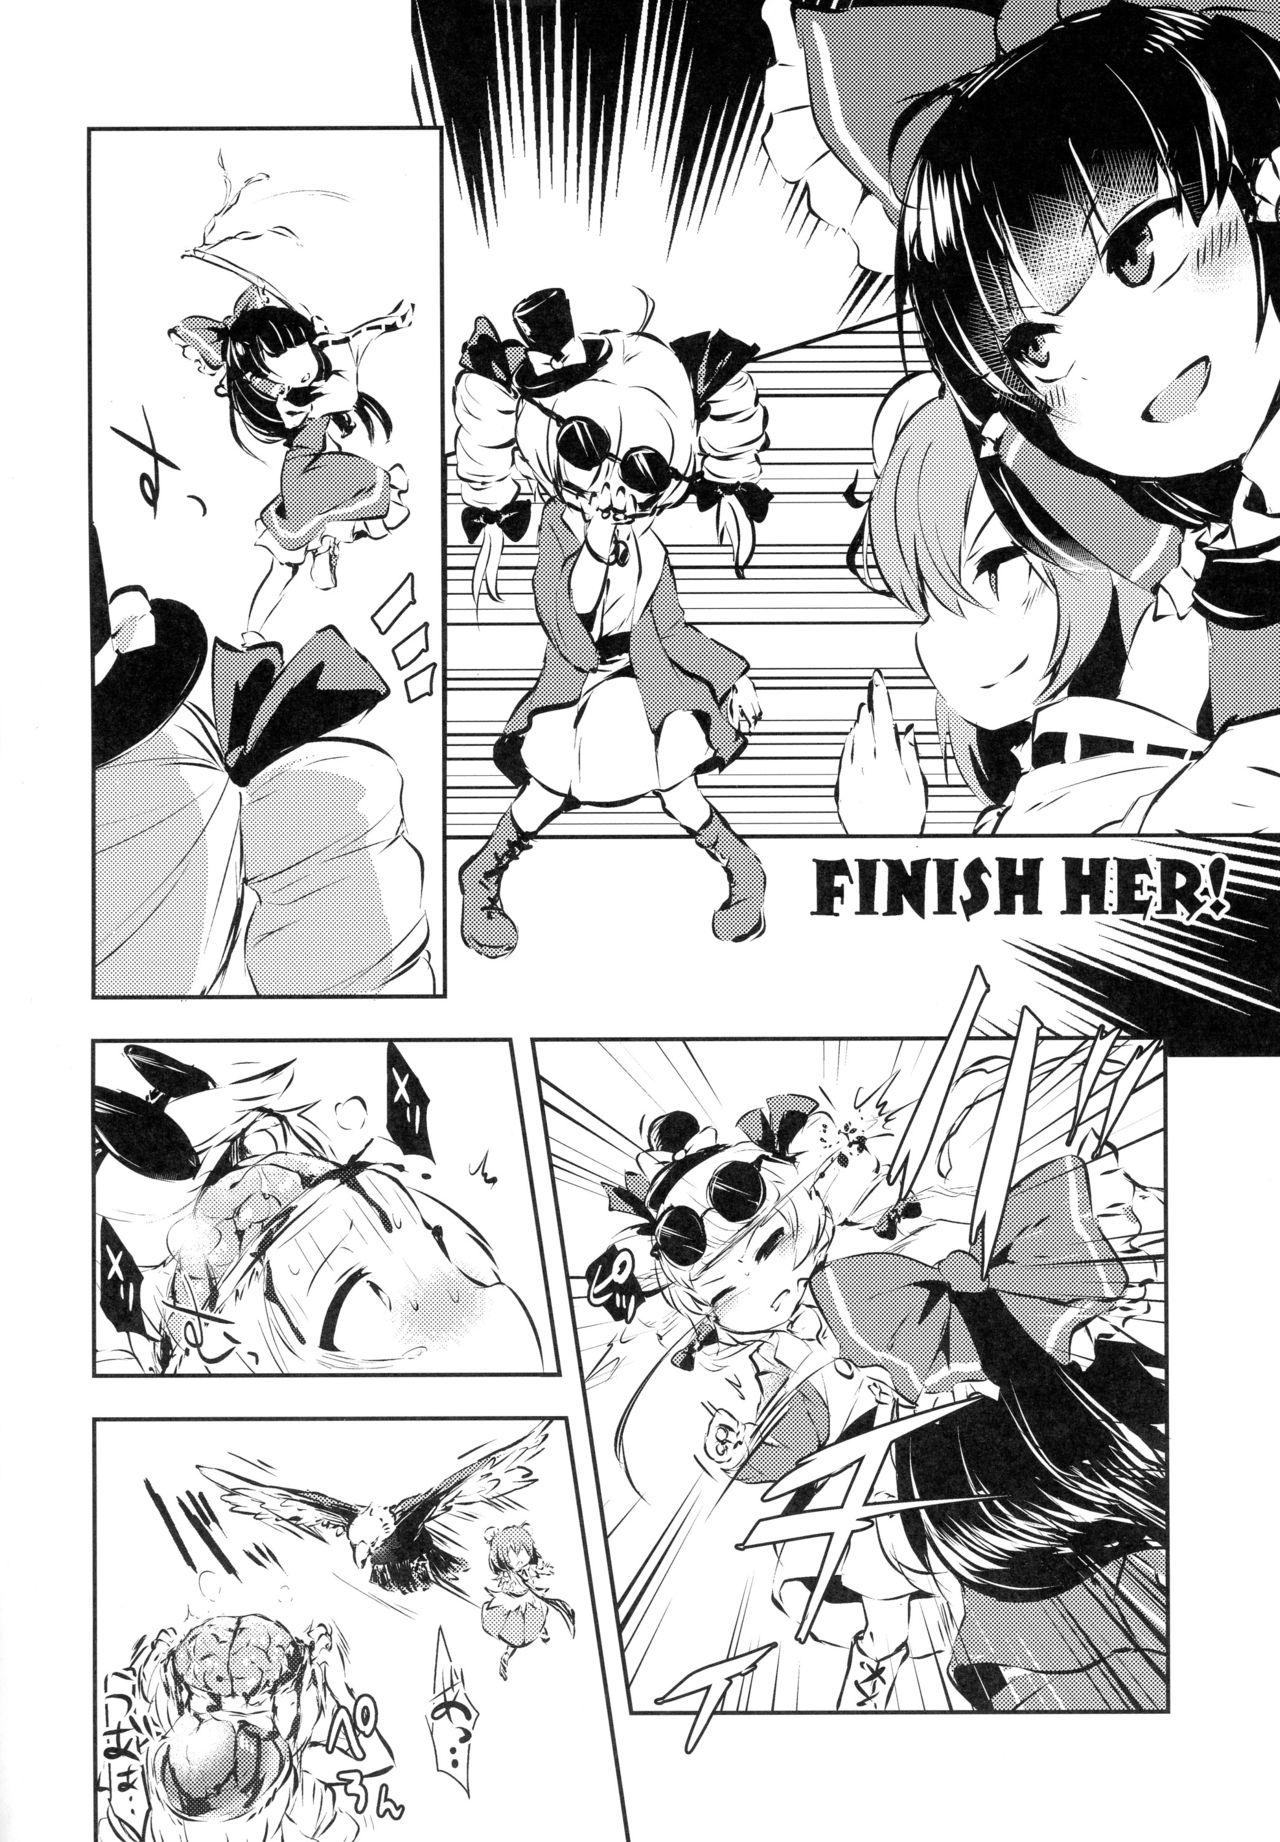 Oiled AURA POSSESSION'S FATALITIES - Touhou project Tiny Tits Porn - Page 4